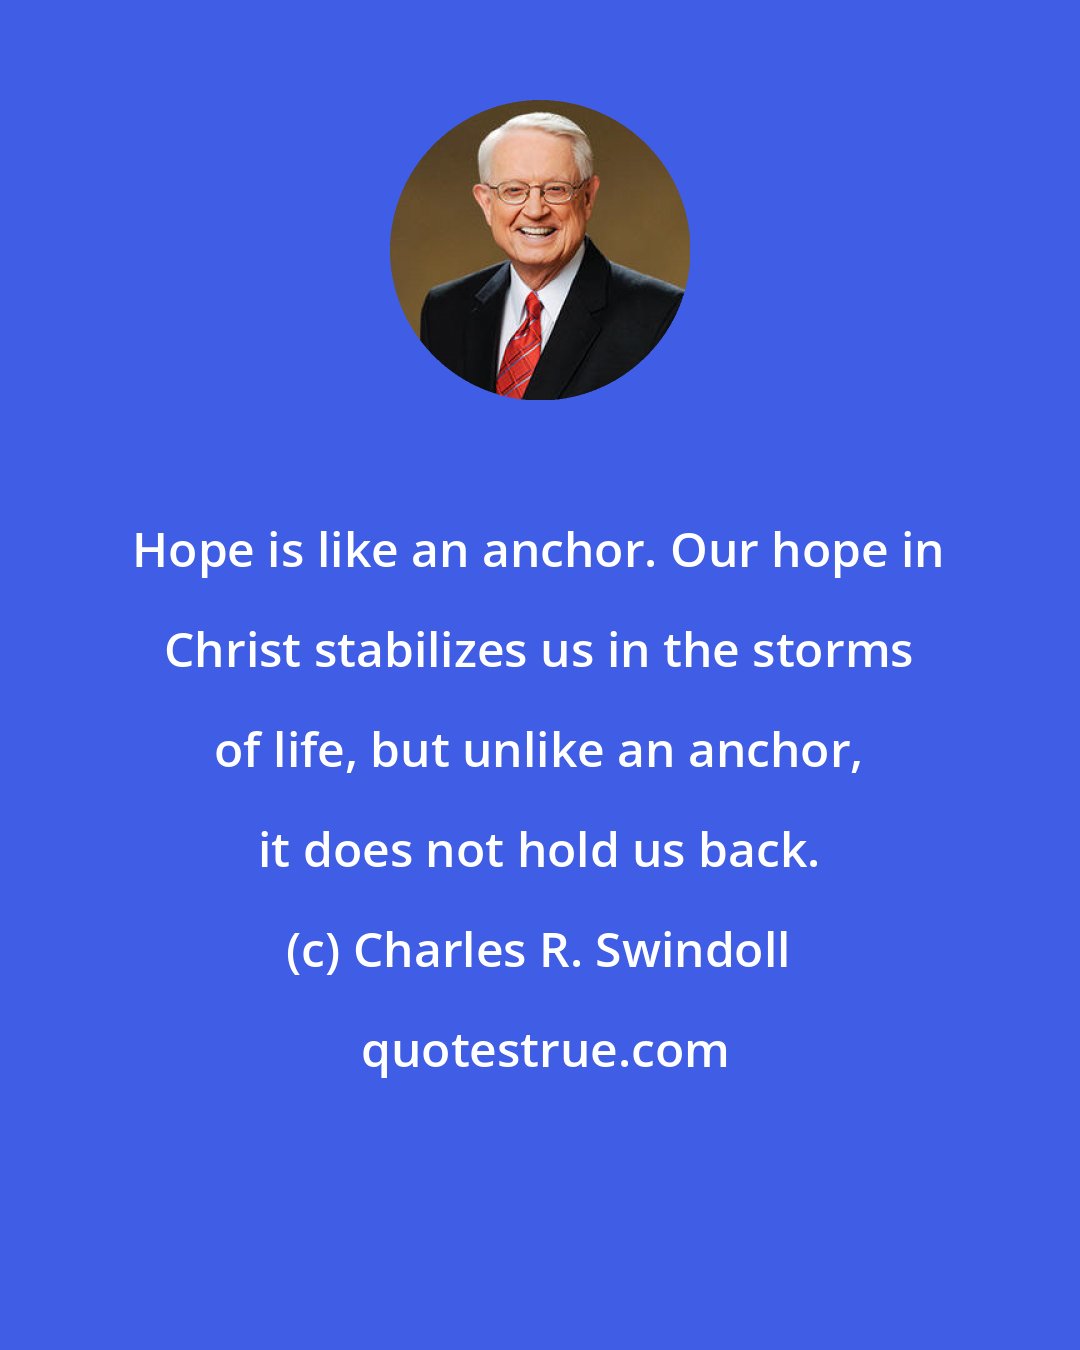 Charles R. Swindoll: Hope is like an anchor. Our hope in Christ stabilizes us in the storms of life, but unlike an anchor, it does not hold us back.